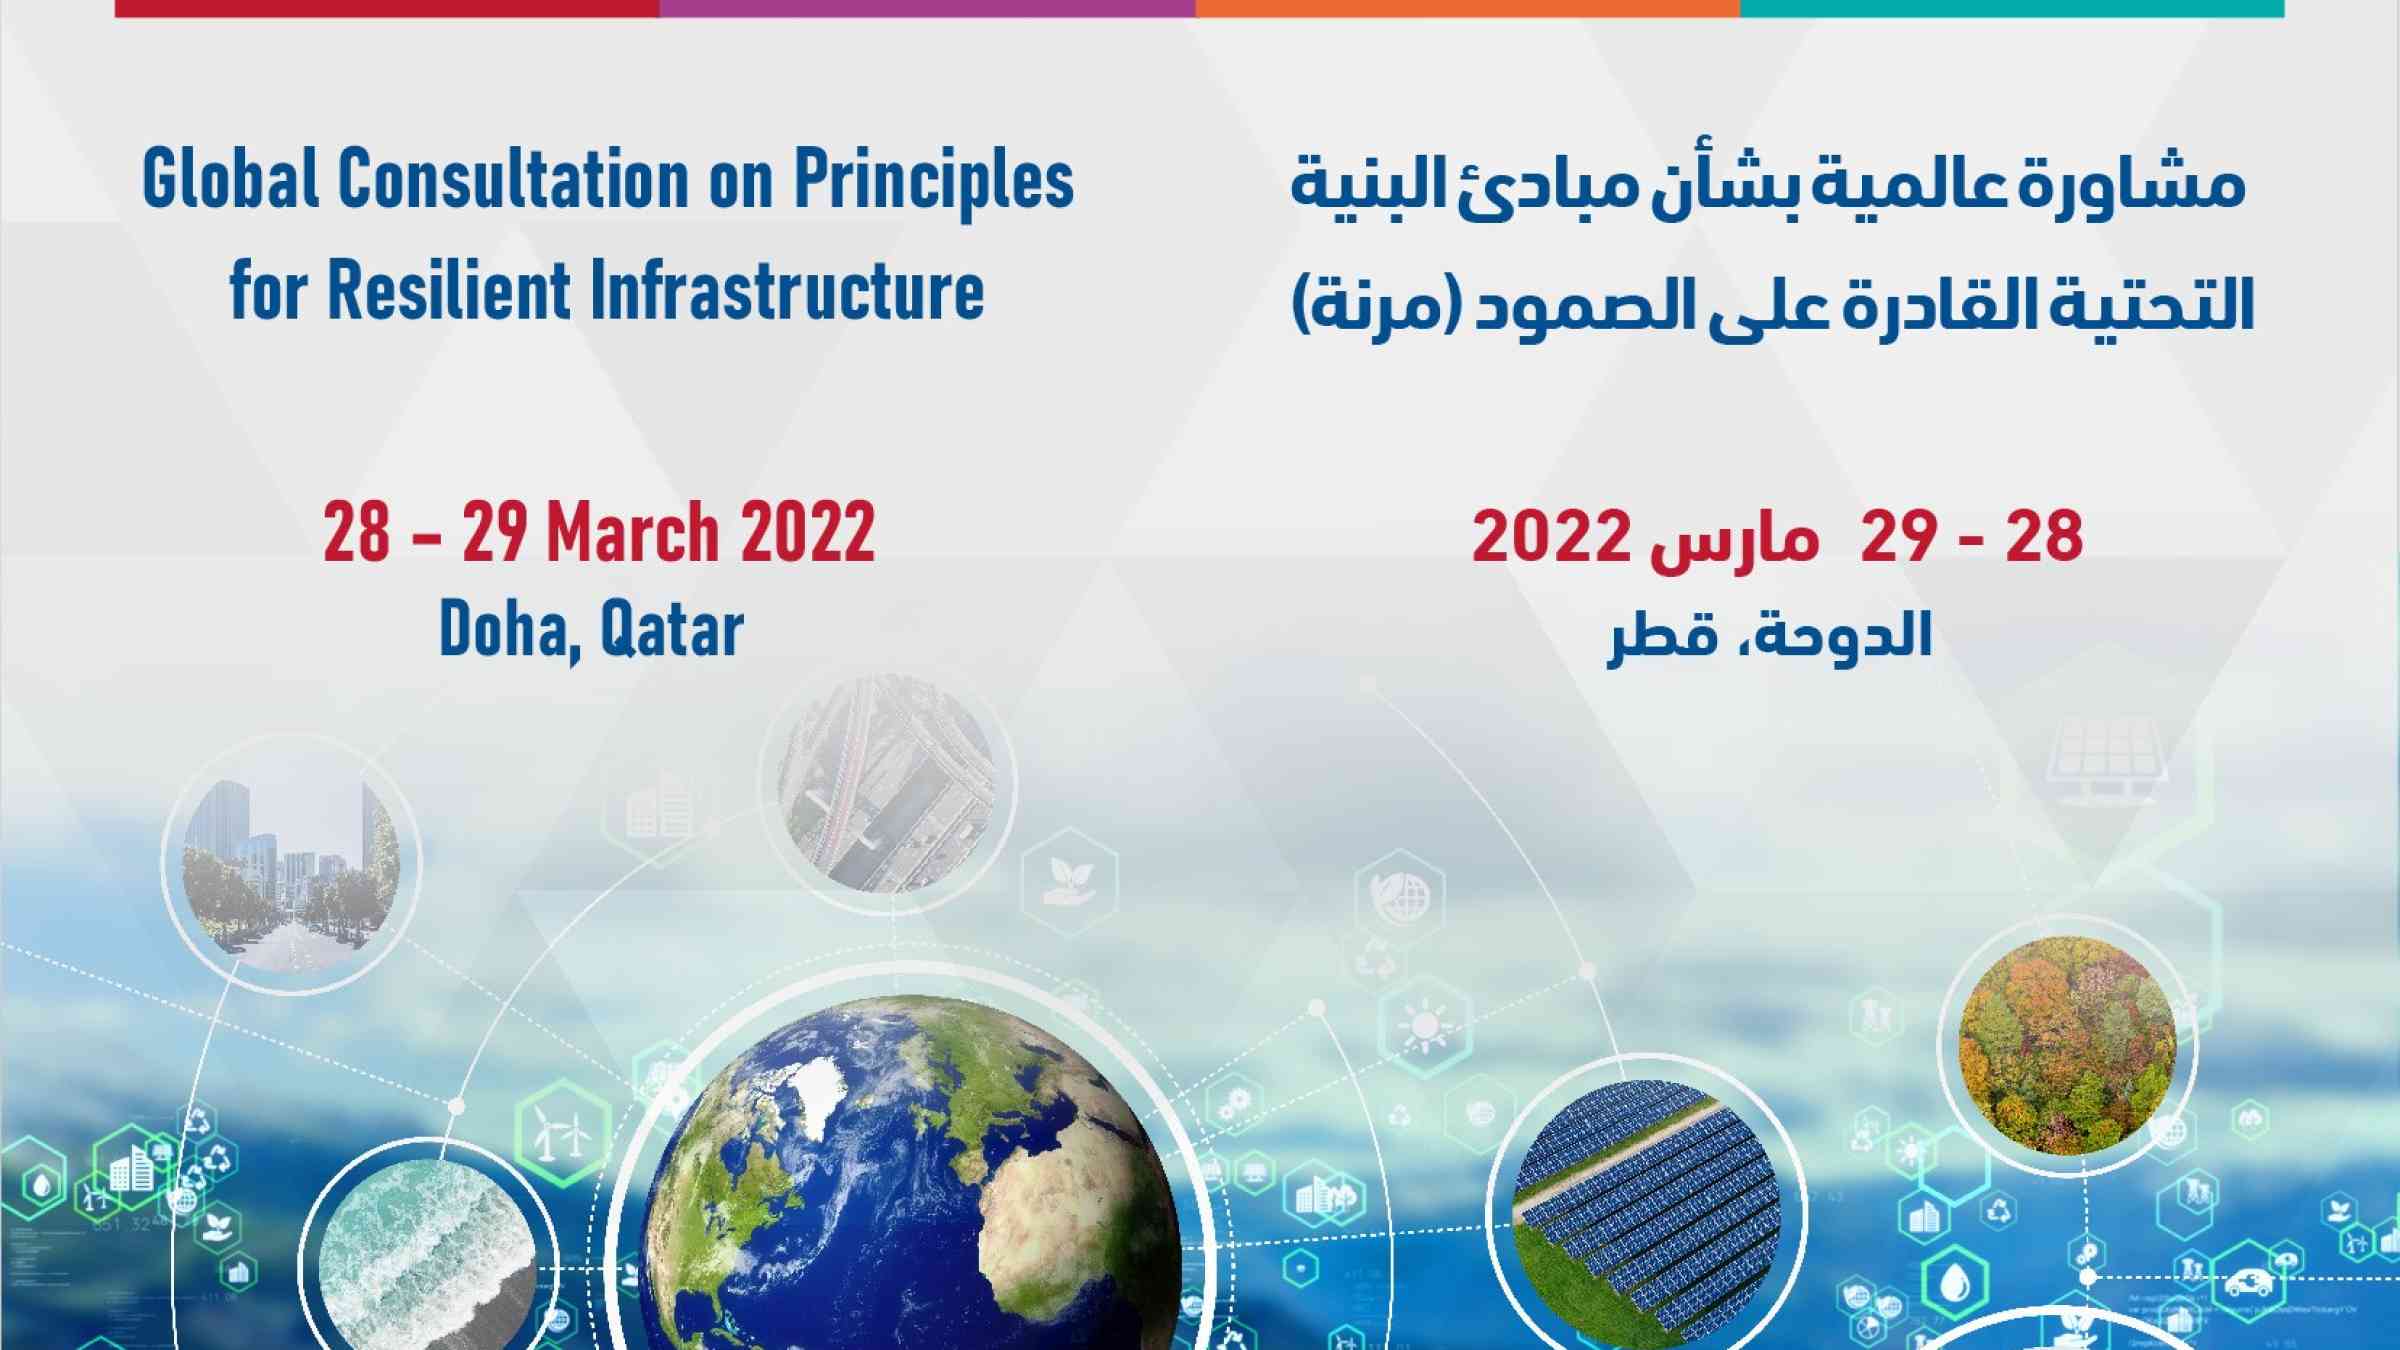 Global Consultation on Principles for Resilient Infrastructure in Doha 